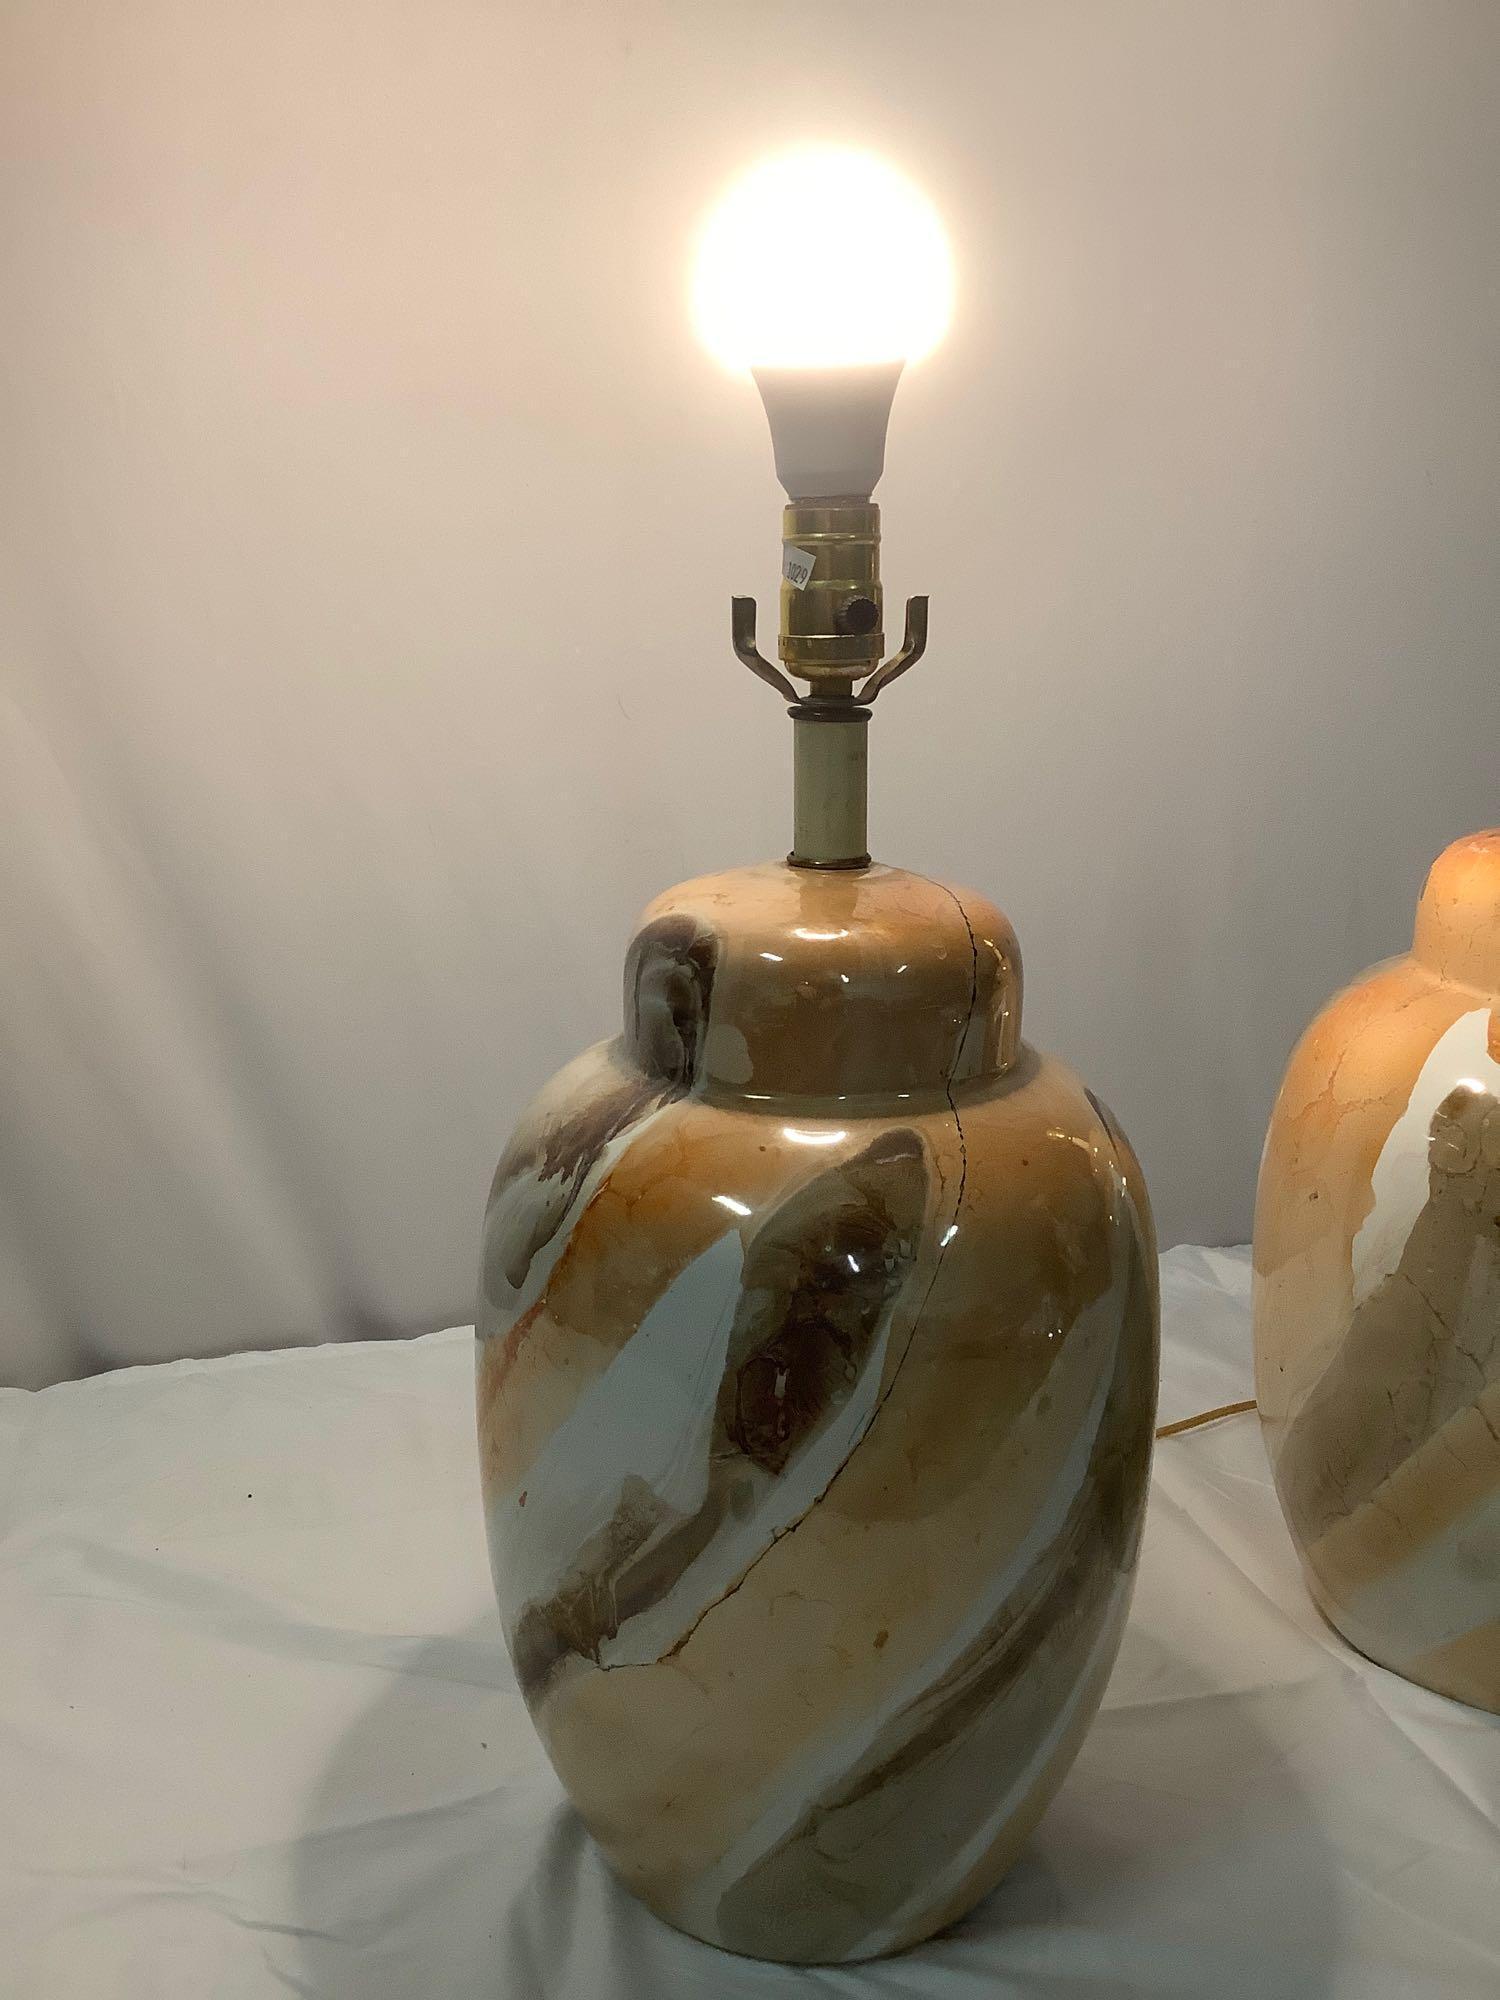 A pair of matching vintage ceramic bass lamps, tested and working, no shades.